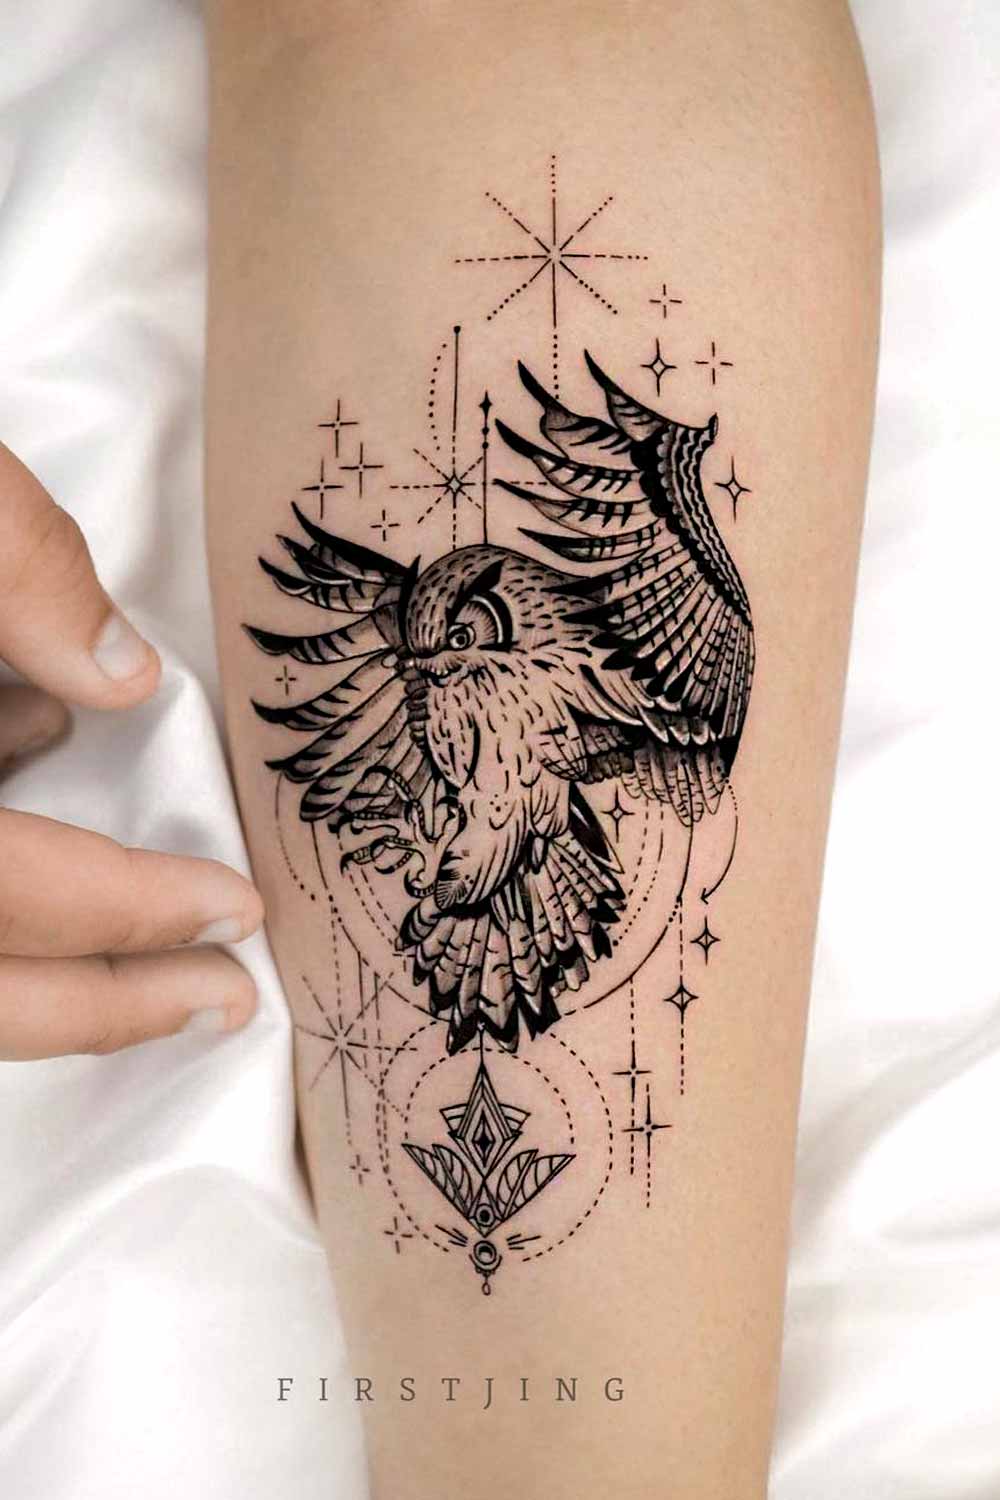 The Ultimate Guide to the Many Different Types and Styles of Tattoos   Tattd  Connecting the Tattoo Industry